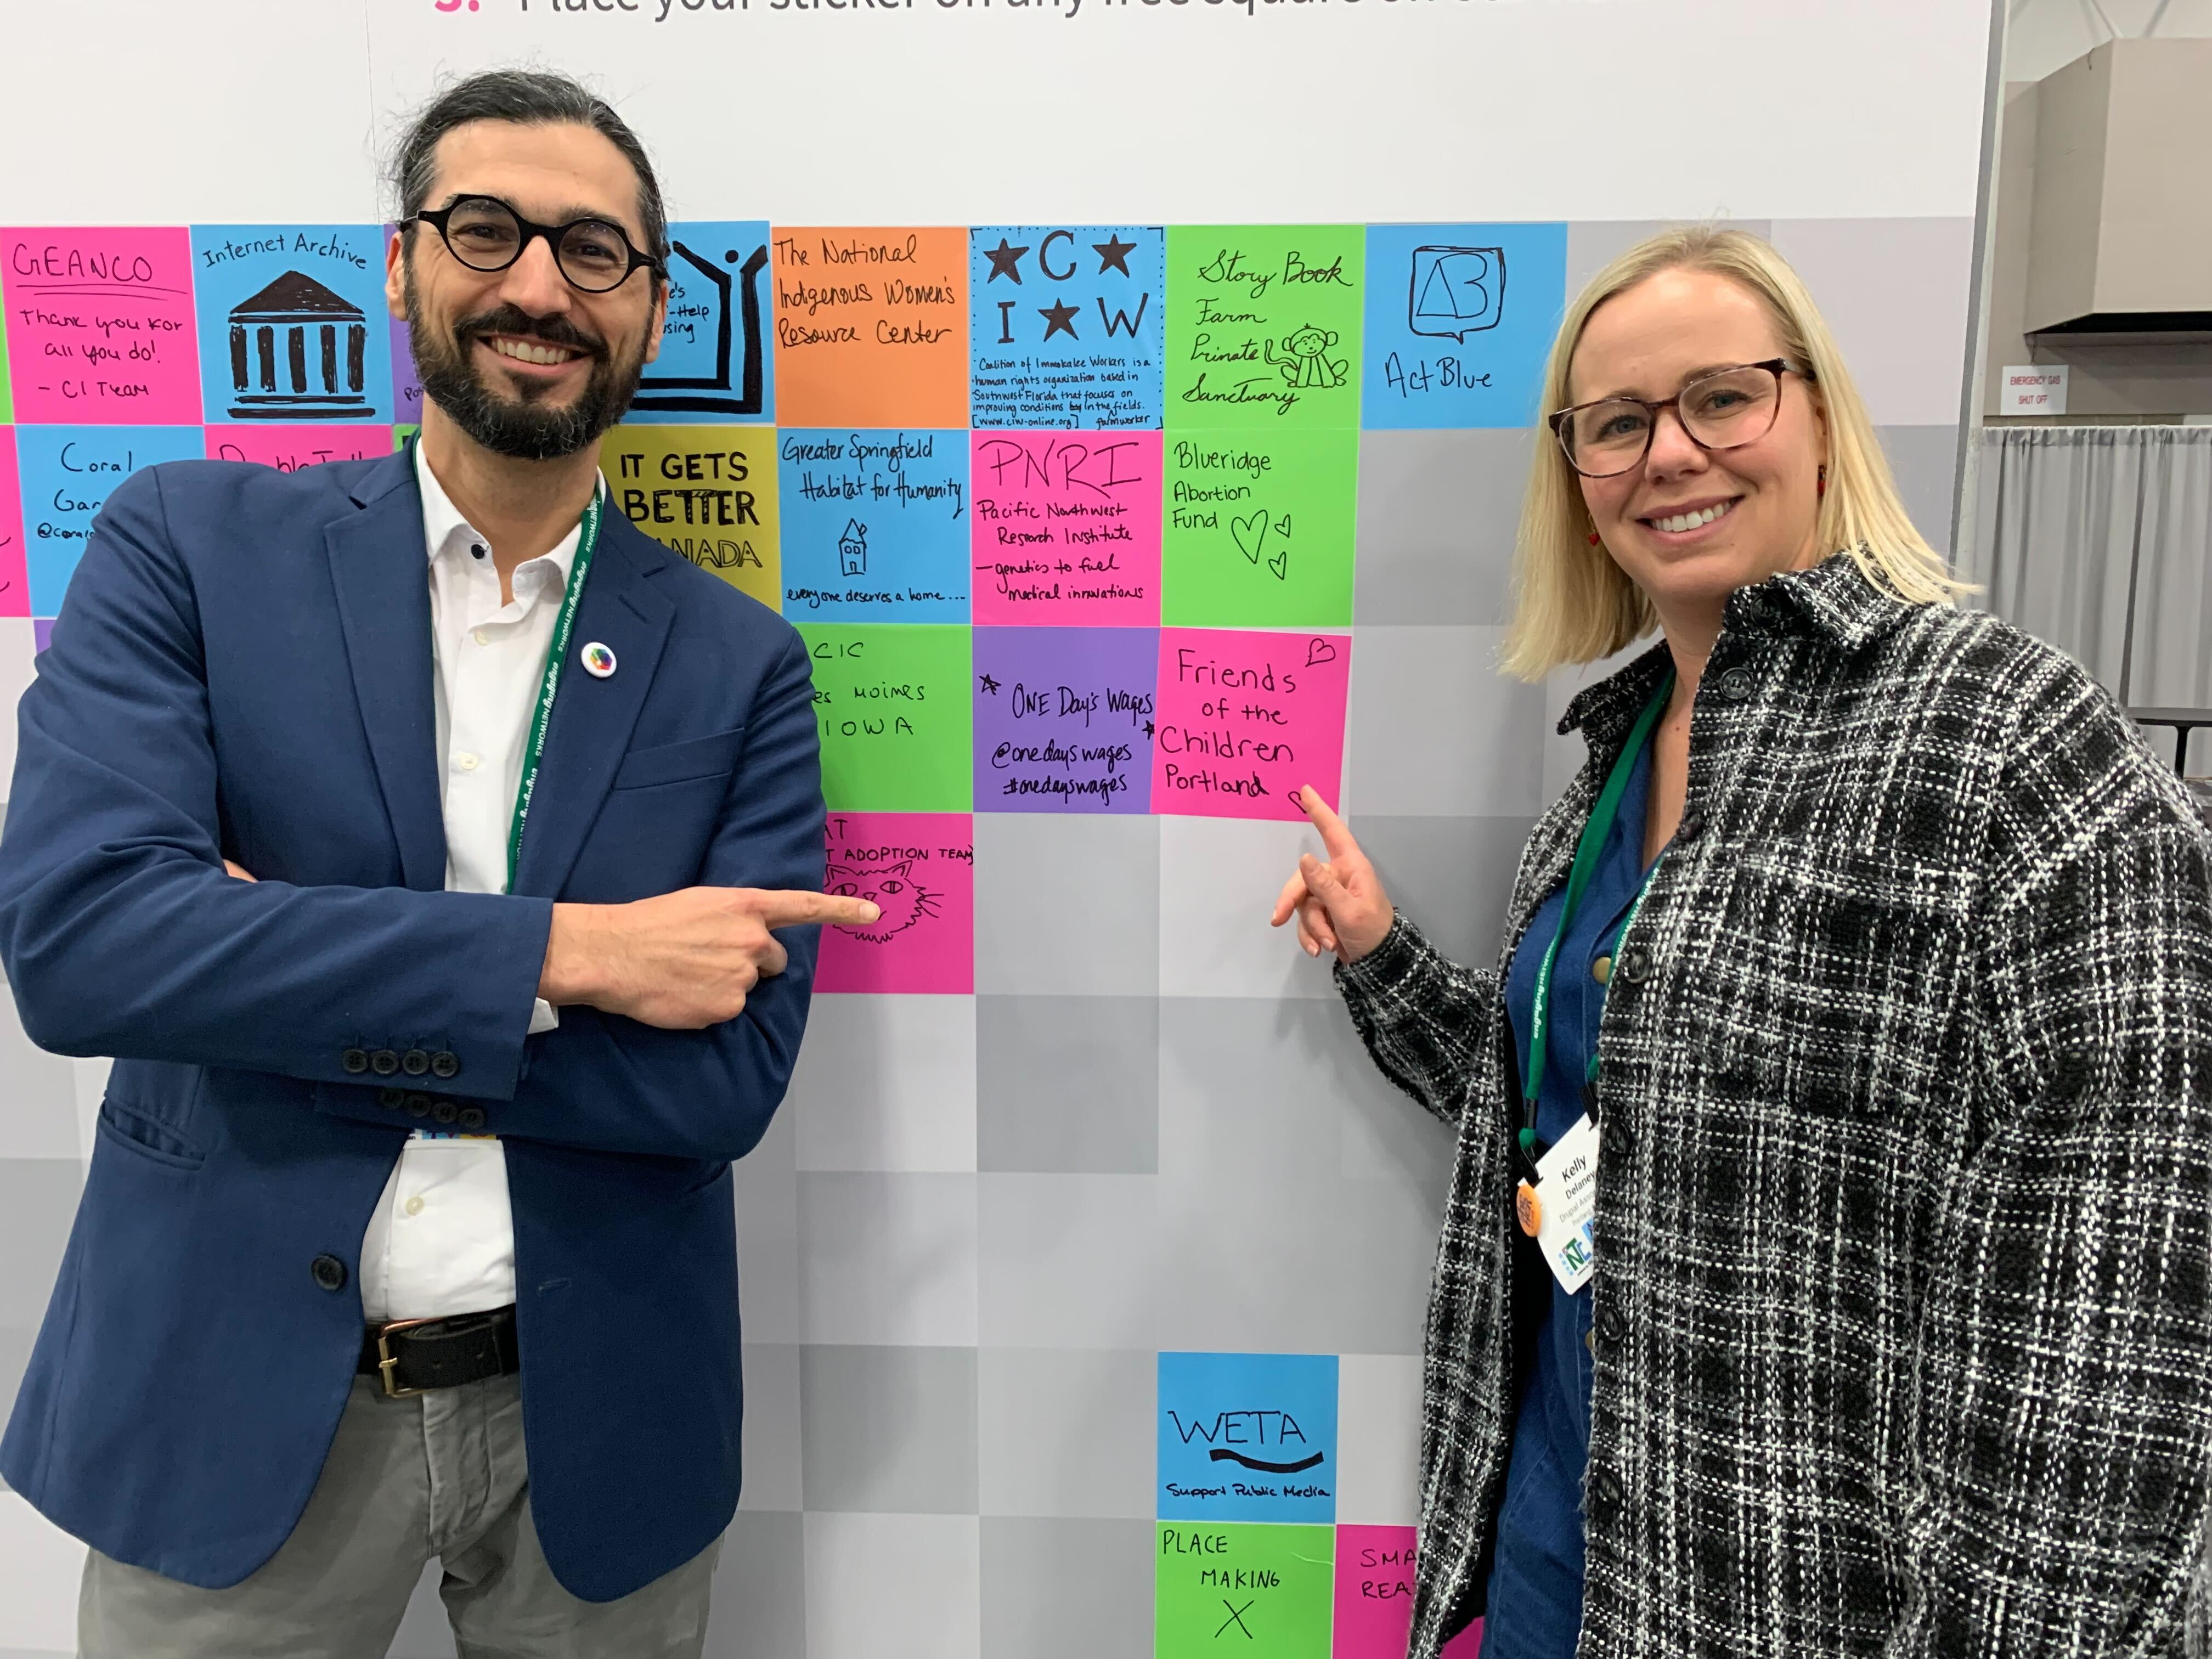 Andrew Mallis, tall Persian man with glasses and a beard with his hair tied back in a pony tail, posing with Kelly Delaney, white woman with blond hair and glasses and a plaid jacket, both pointing at the Kalamuna donation wall. 